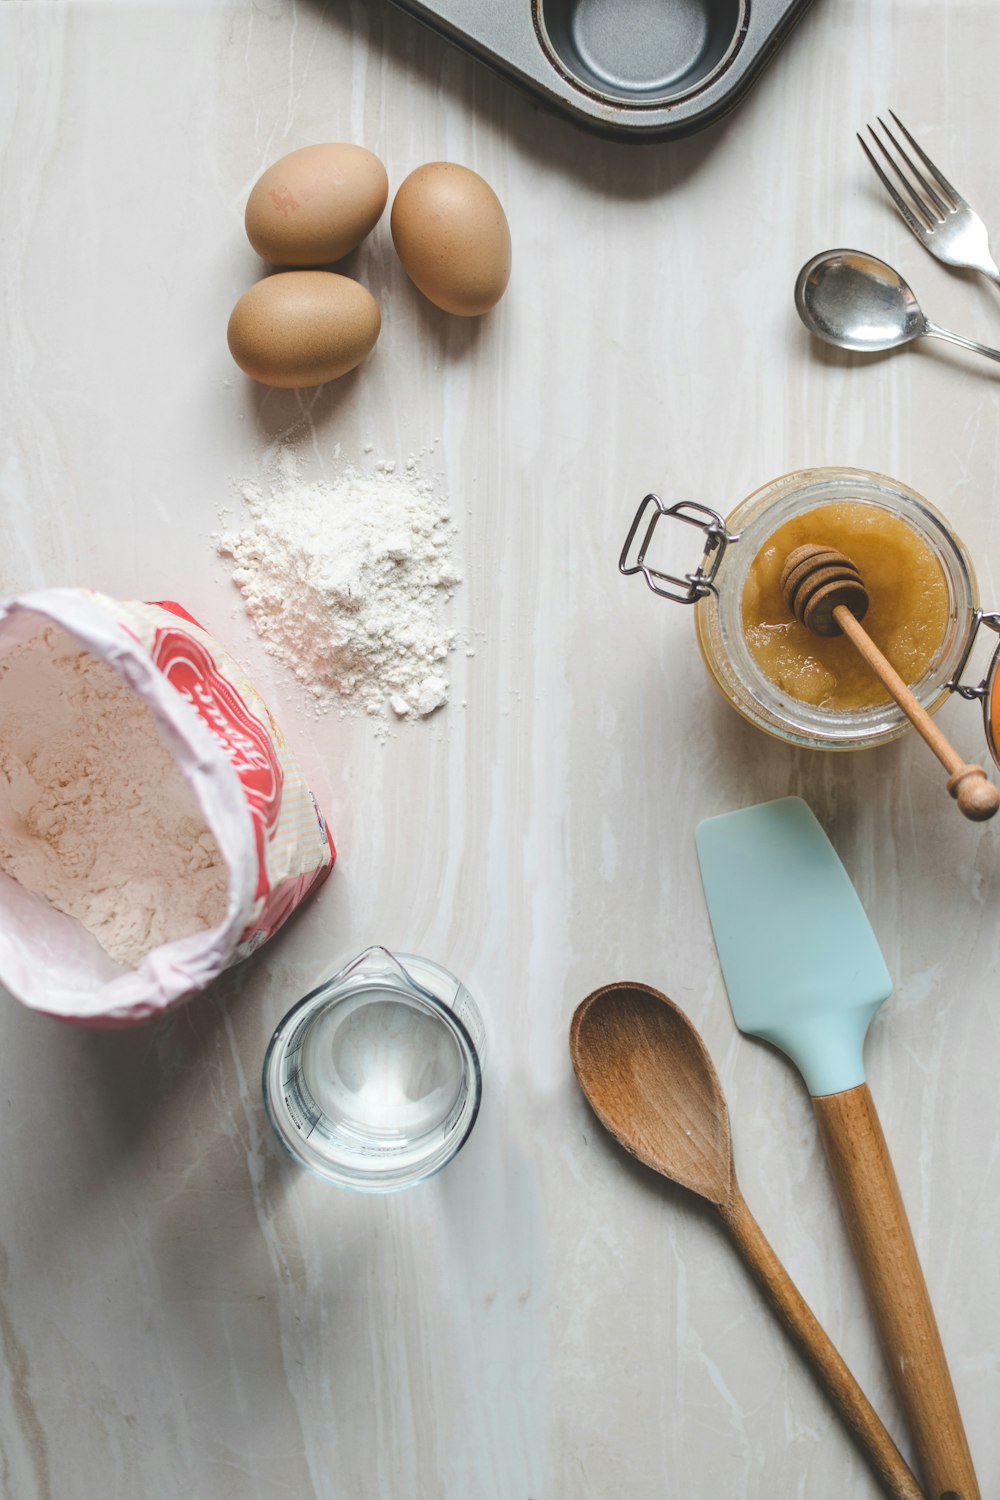 What Is Caster Sugar? Does It Make a Difference in Baking?